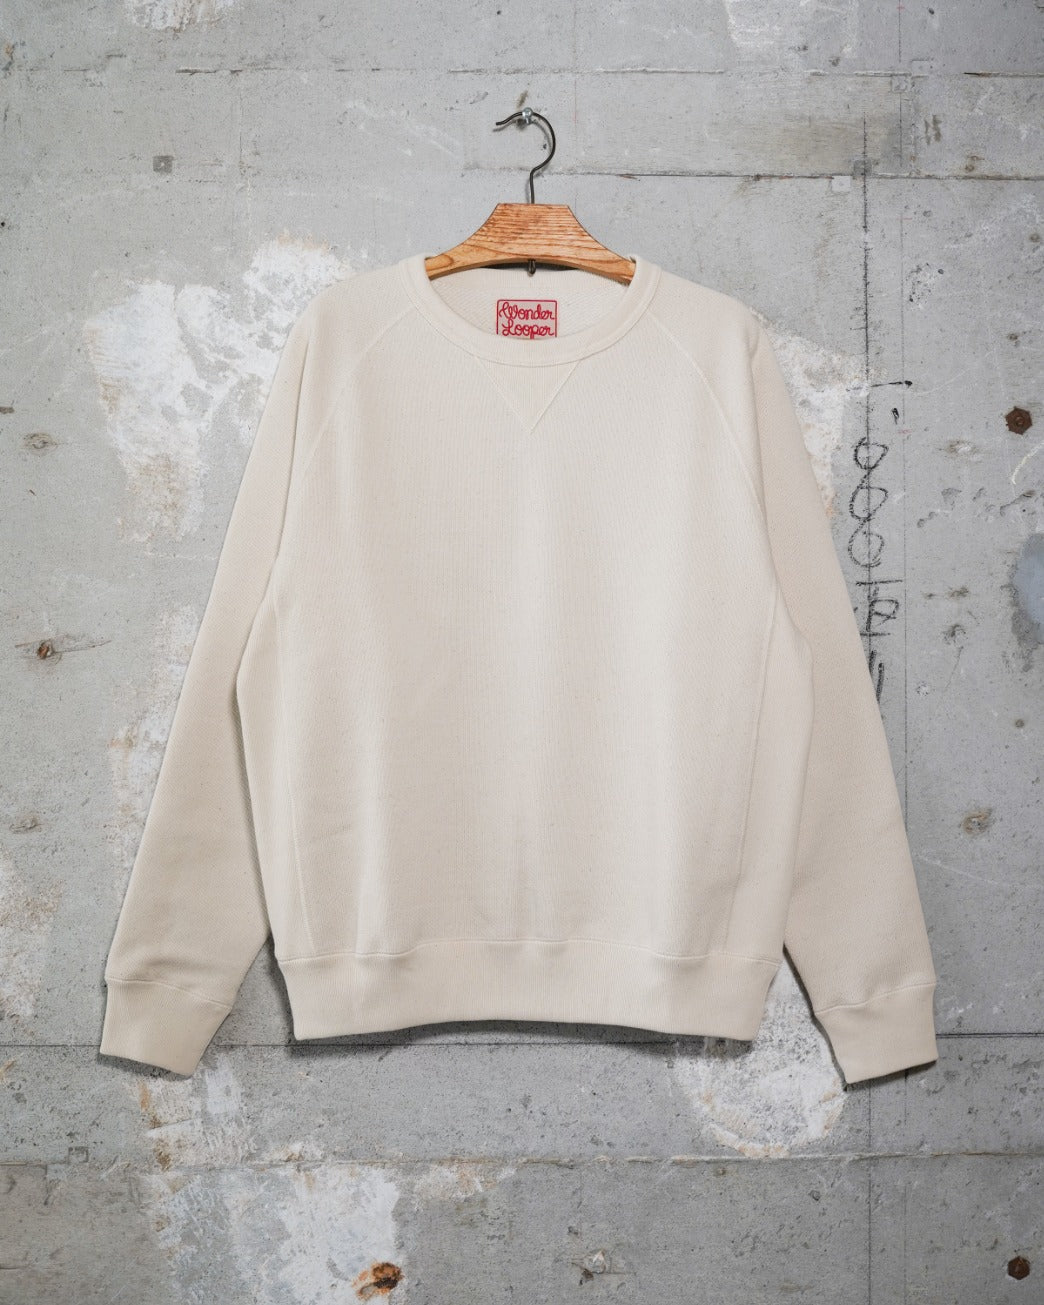 Sweatshirt in Cream made of Cotton French Terry